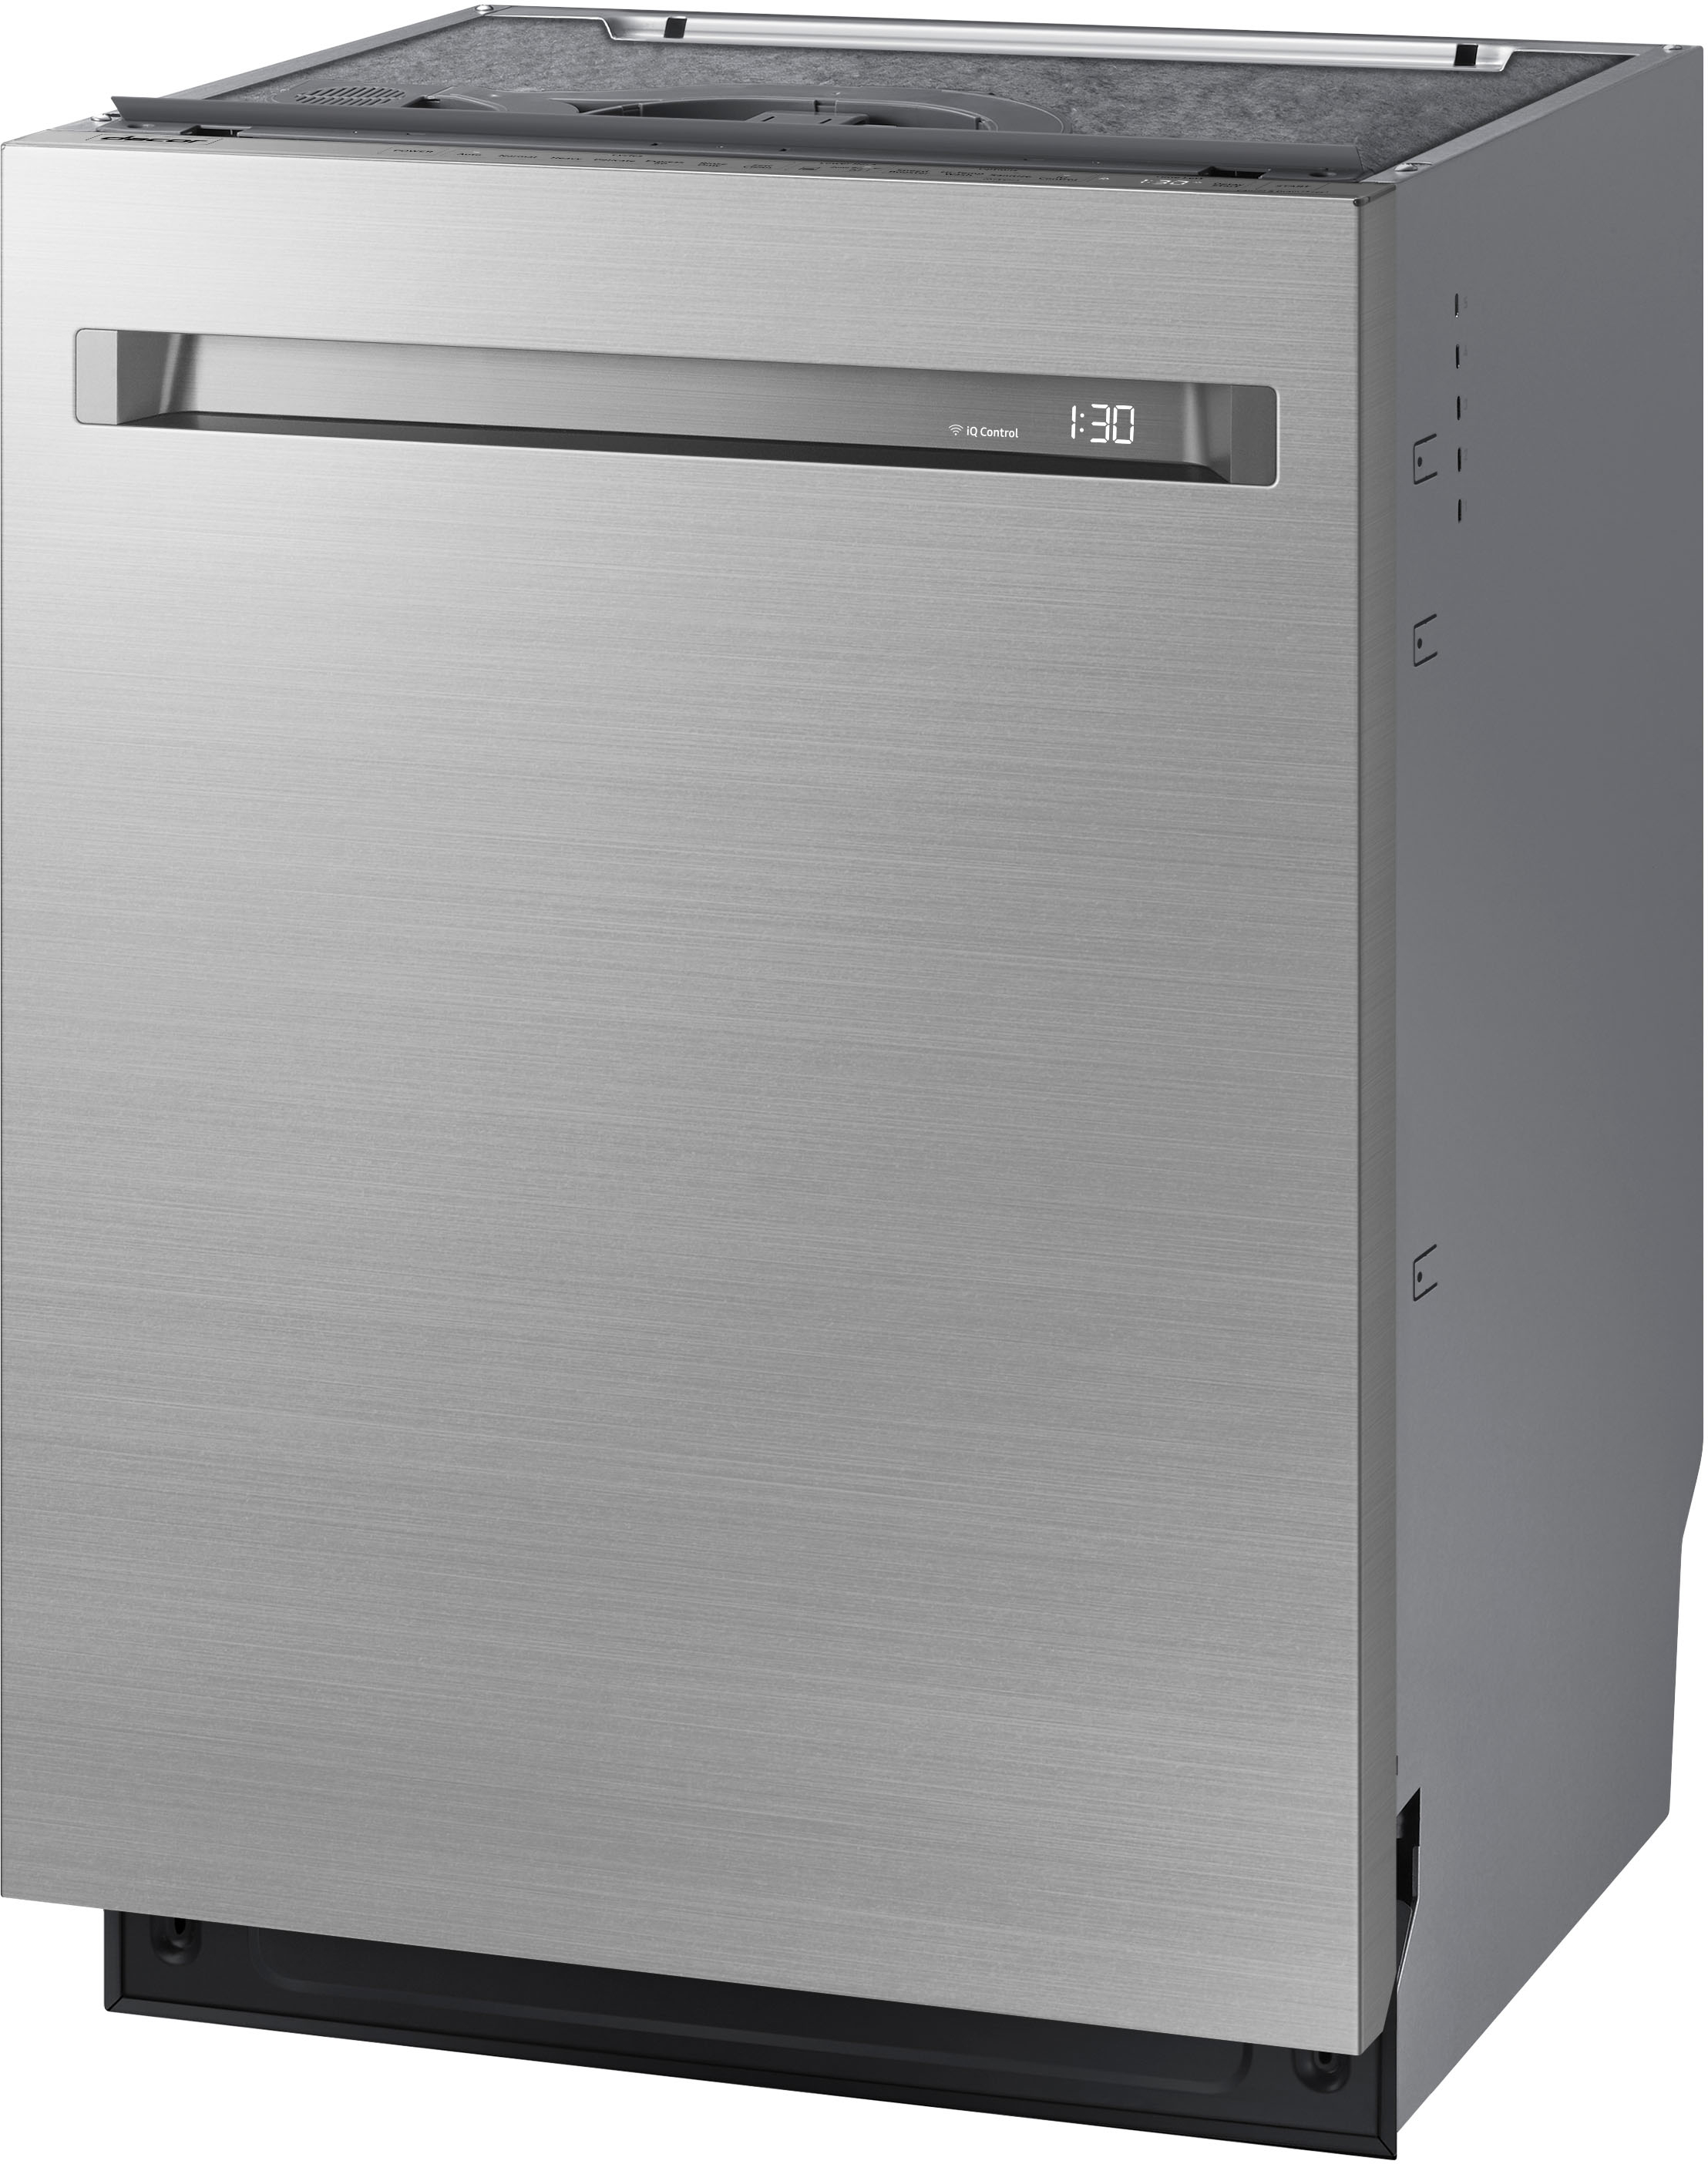 Angle View: Dacor - Professional Top Control Built-In Dishwasher with Stainless Steel Tub, WaterWall™, 3rd Rack, 44 dBA, Handle Required - Silver stainless steel